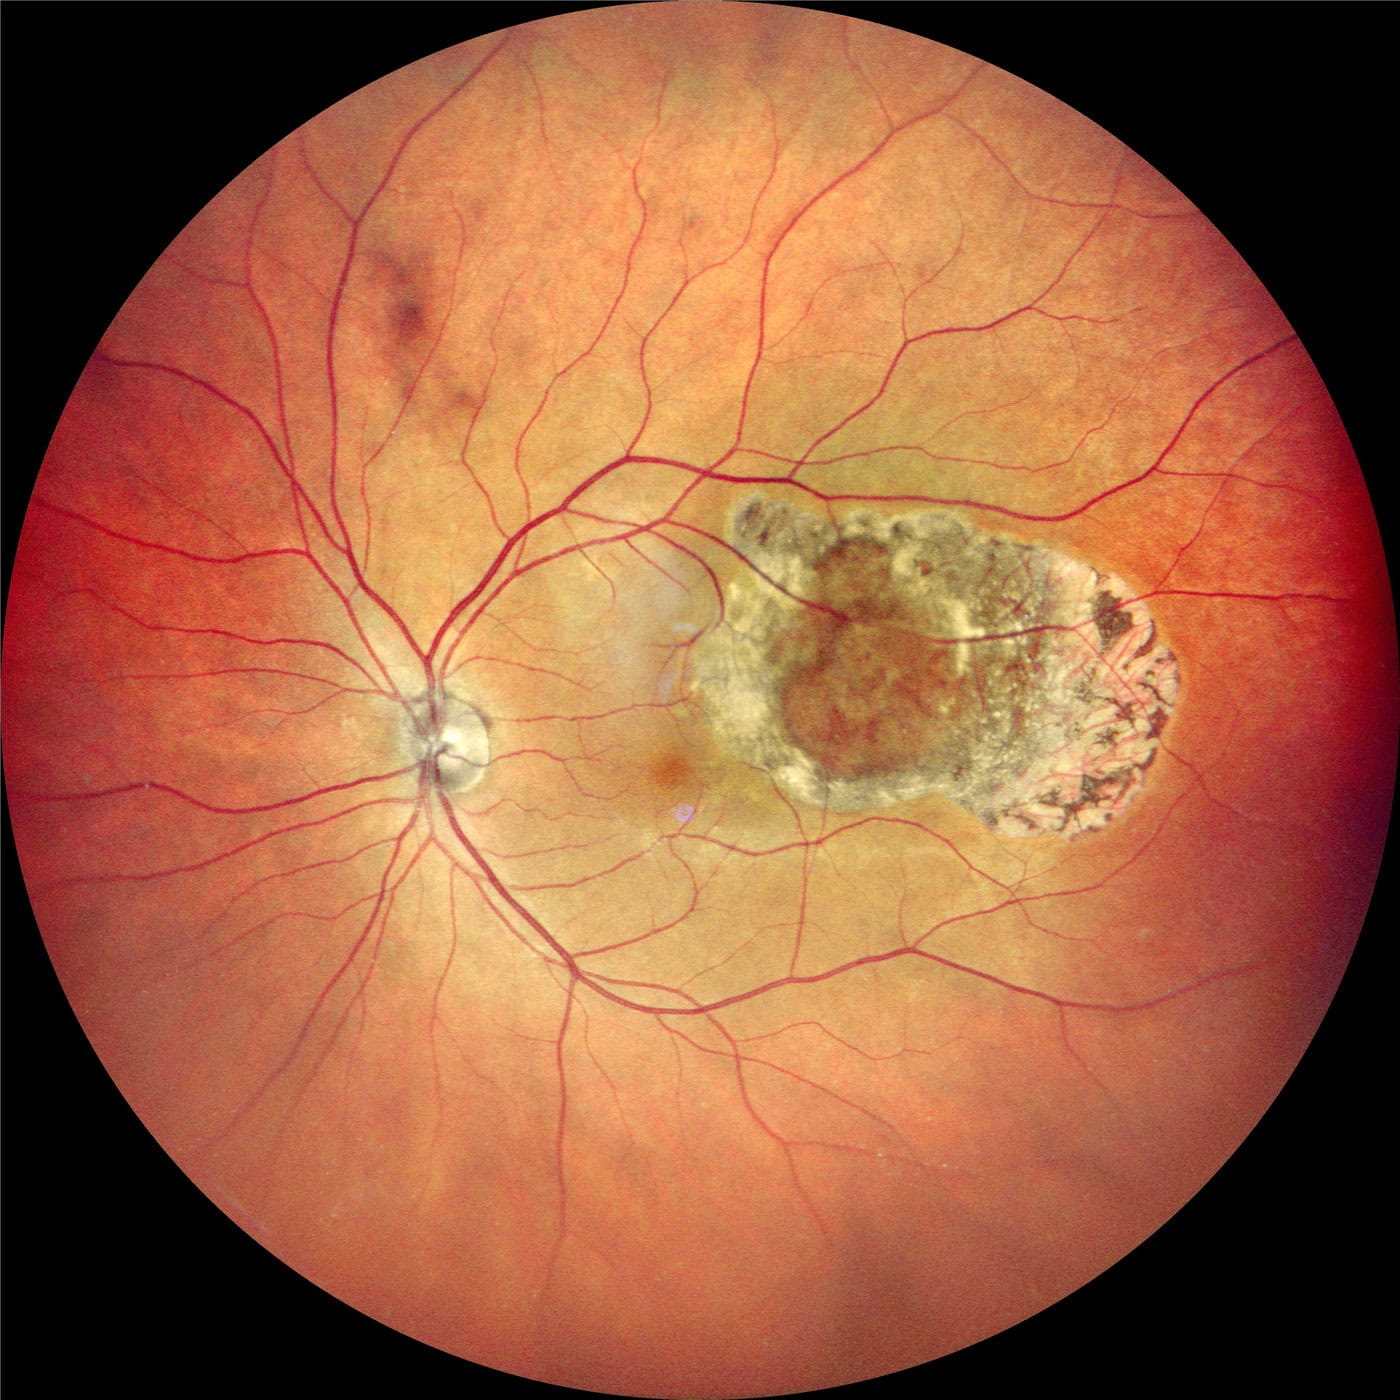 A Retinal Image Captured With A Nidek Device Shows Detailed Blood Vessels Radiating From The Optic Nerve. A Large, Irregularly Shaped Lesion Is Present Near The Center, Exhibiting Scar-Like Tissue. The Overall Color Palette Of The Retina Includes Red, Orange, And Brown Hues.